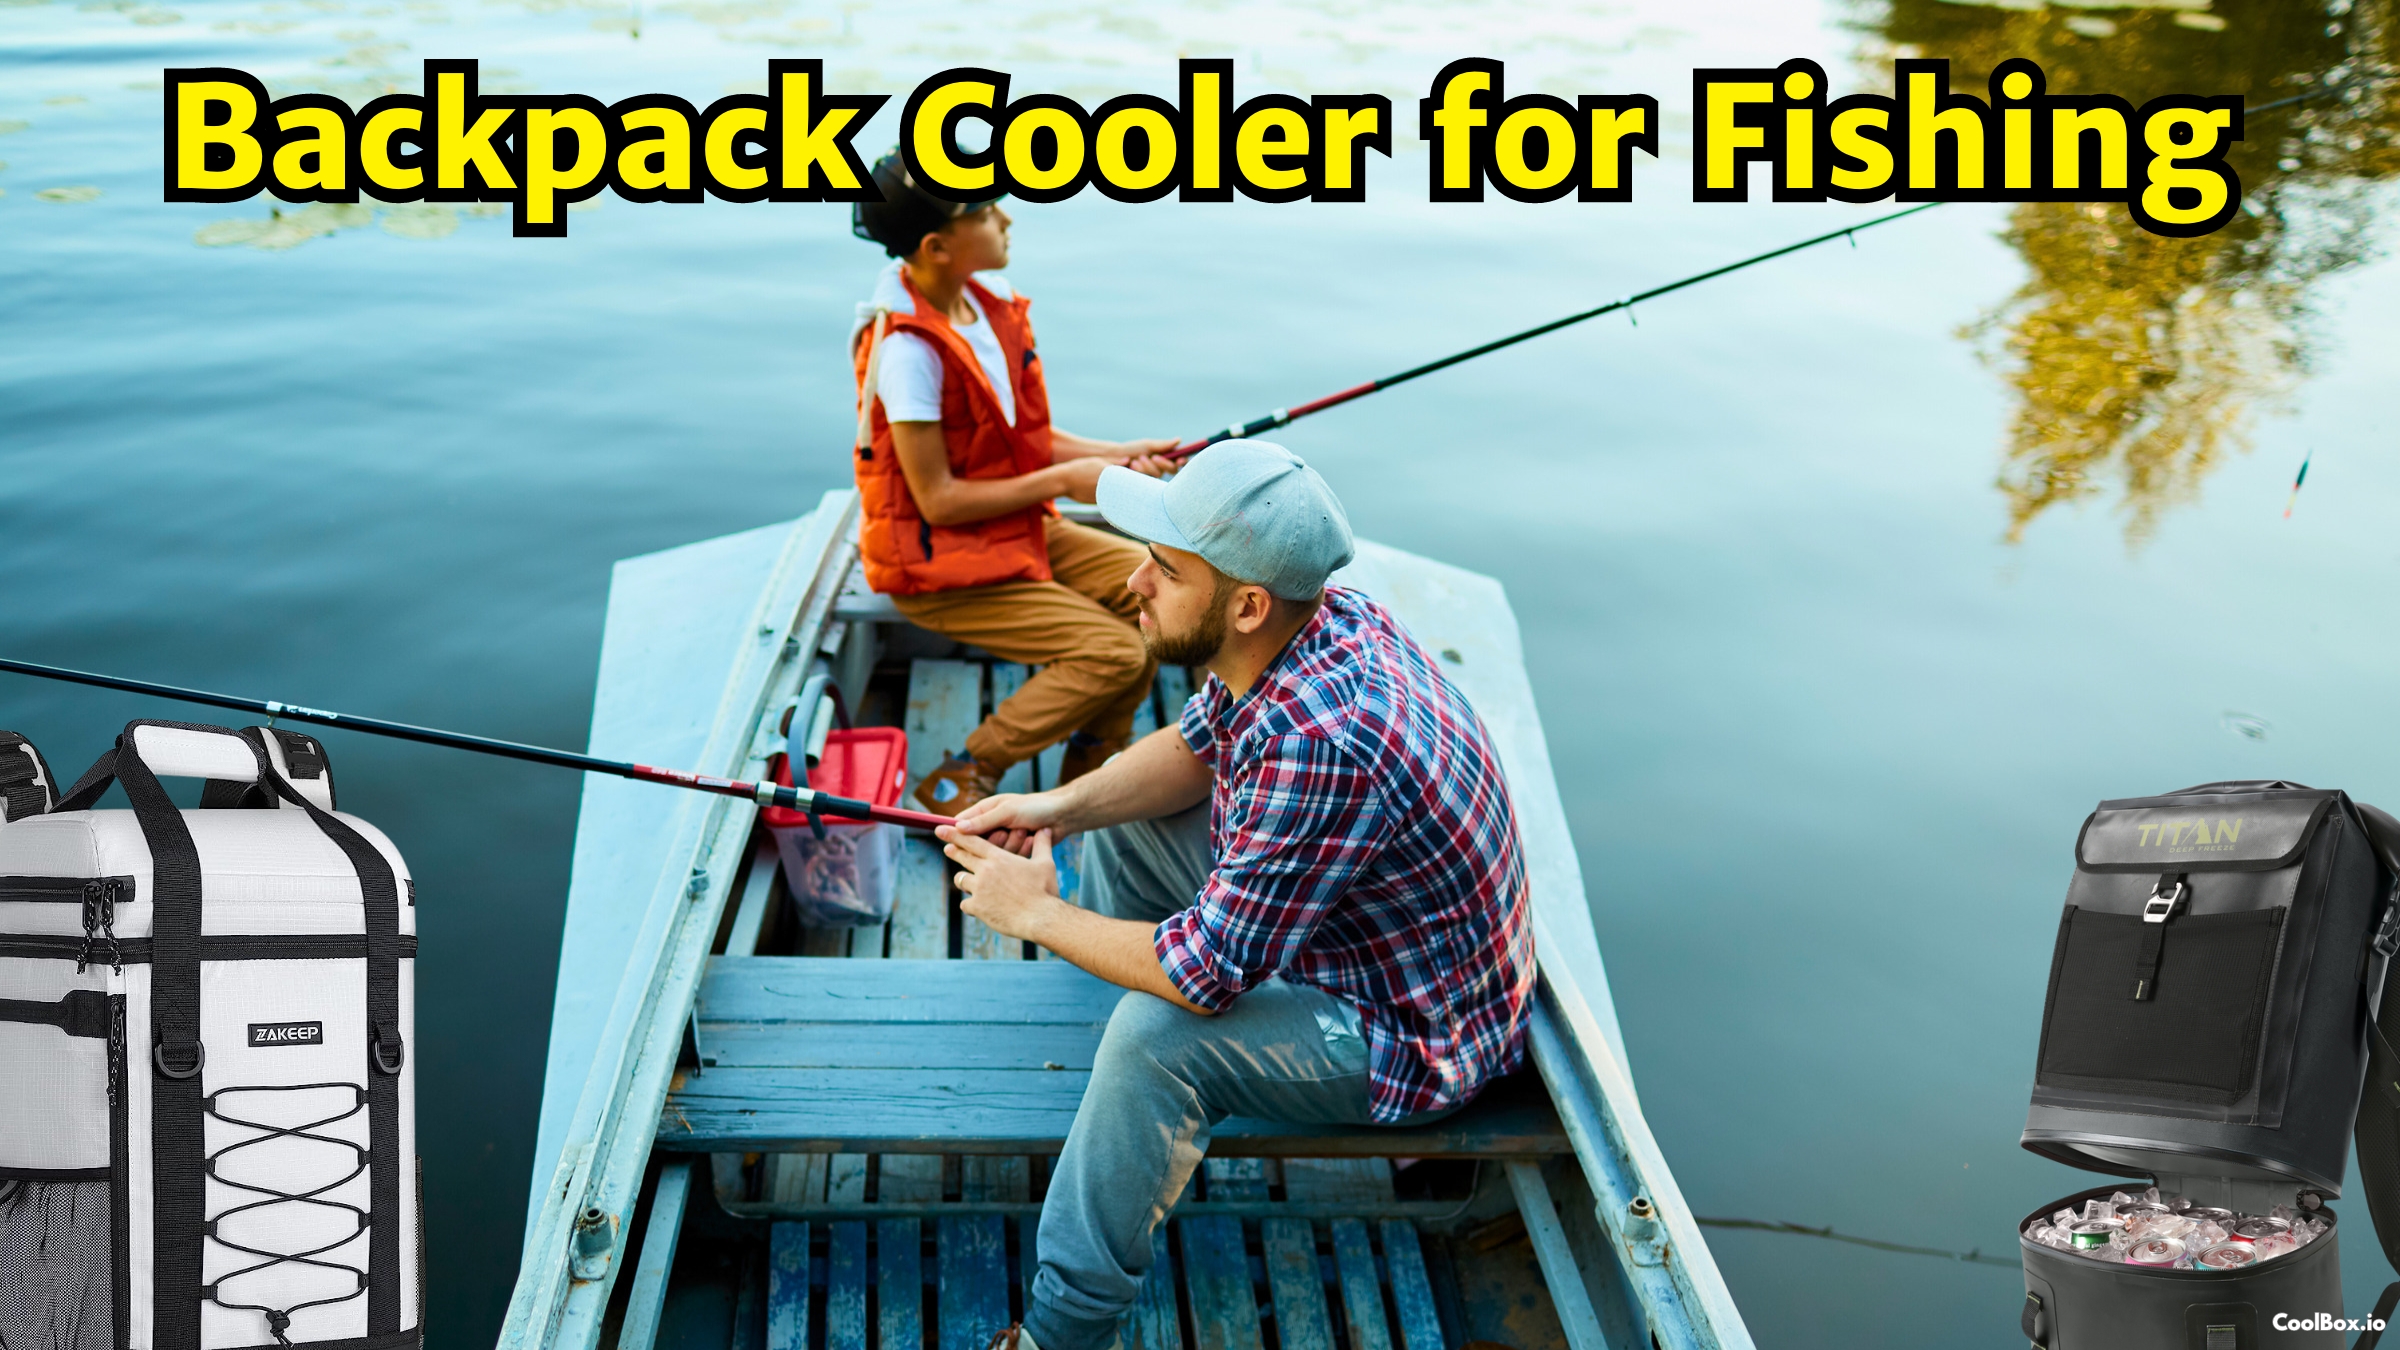 Can You Take A Backpack Cooler Box For Fishing?